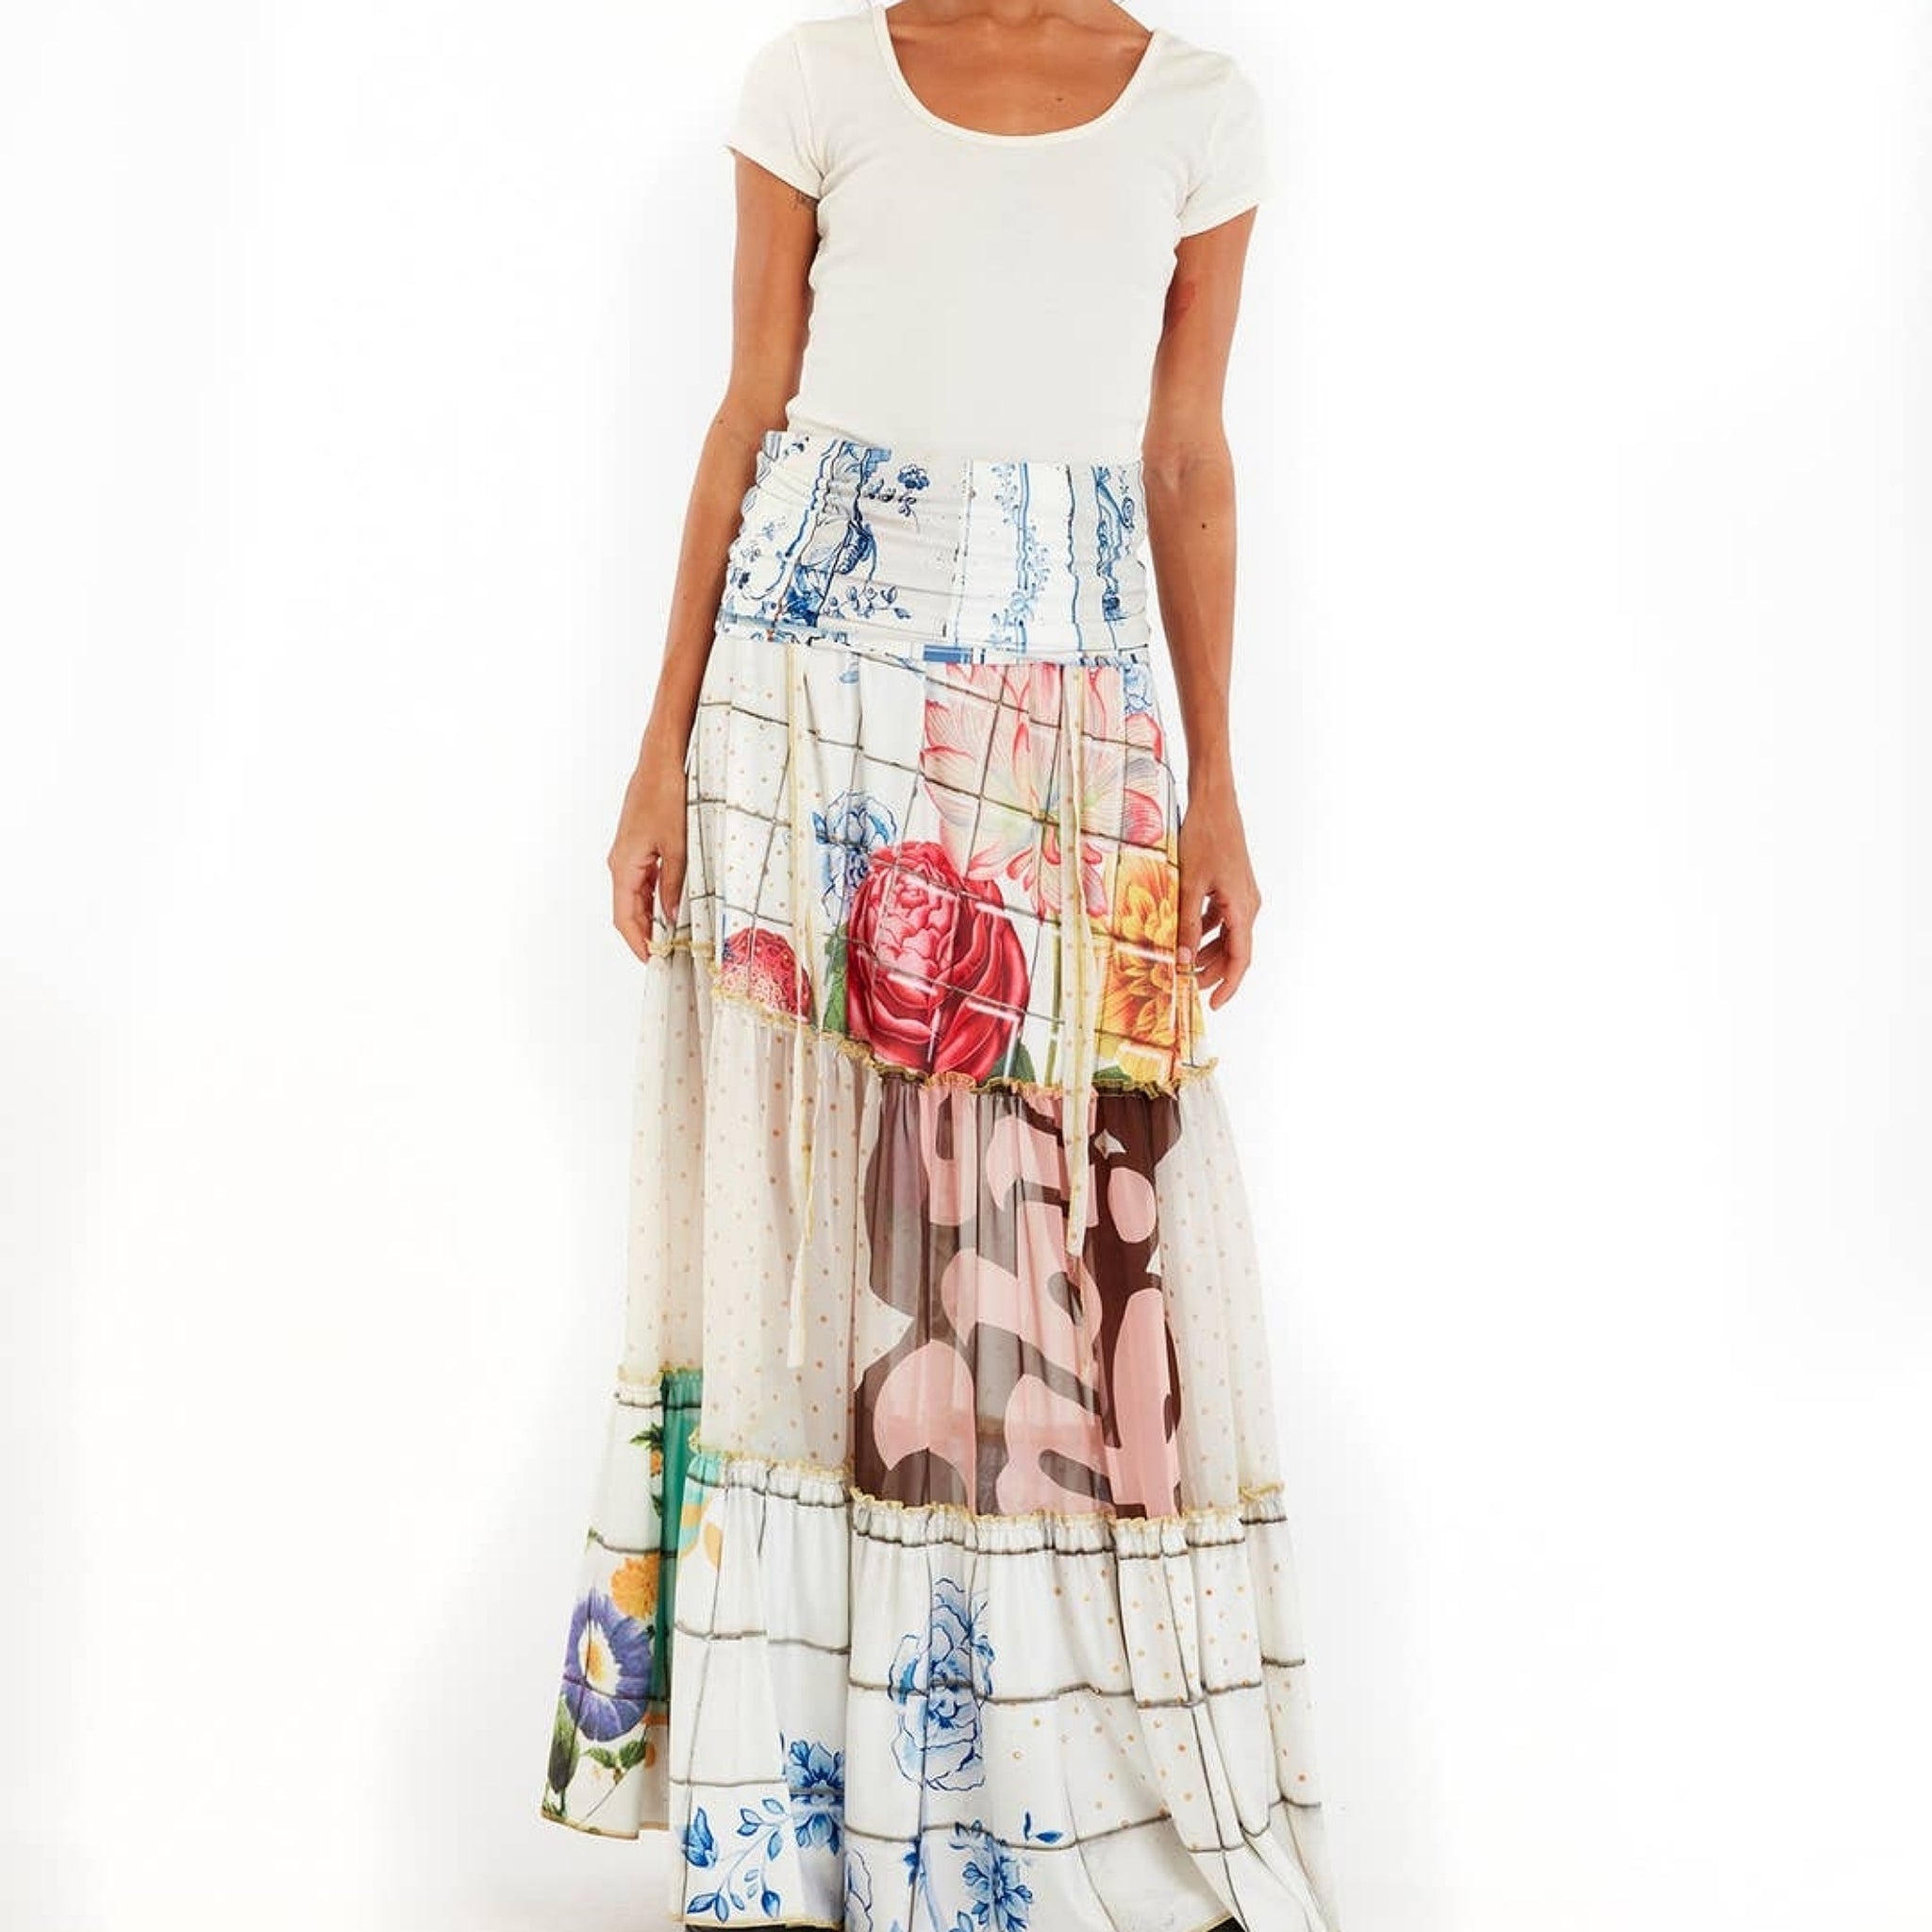 The Art of Fashion Unique Dress or Maxi Skirt (7588583538862)